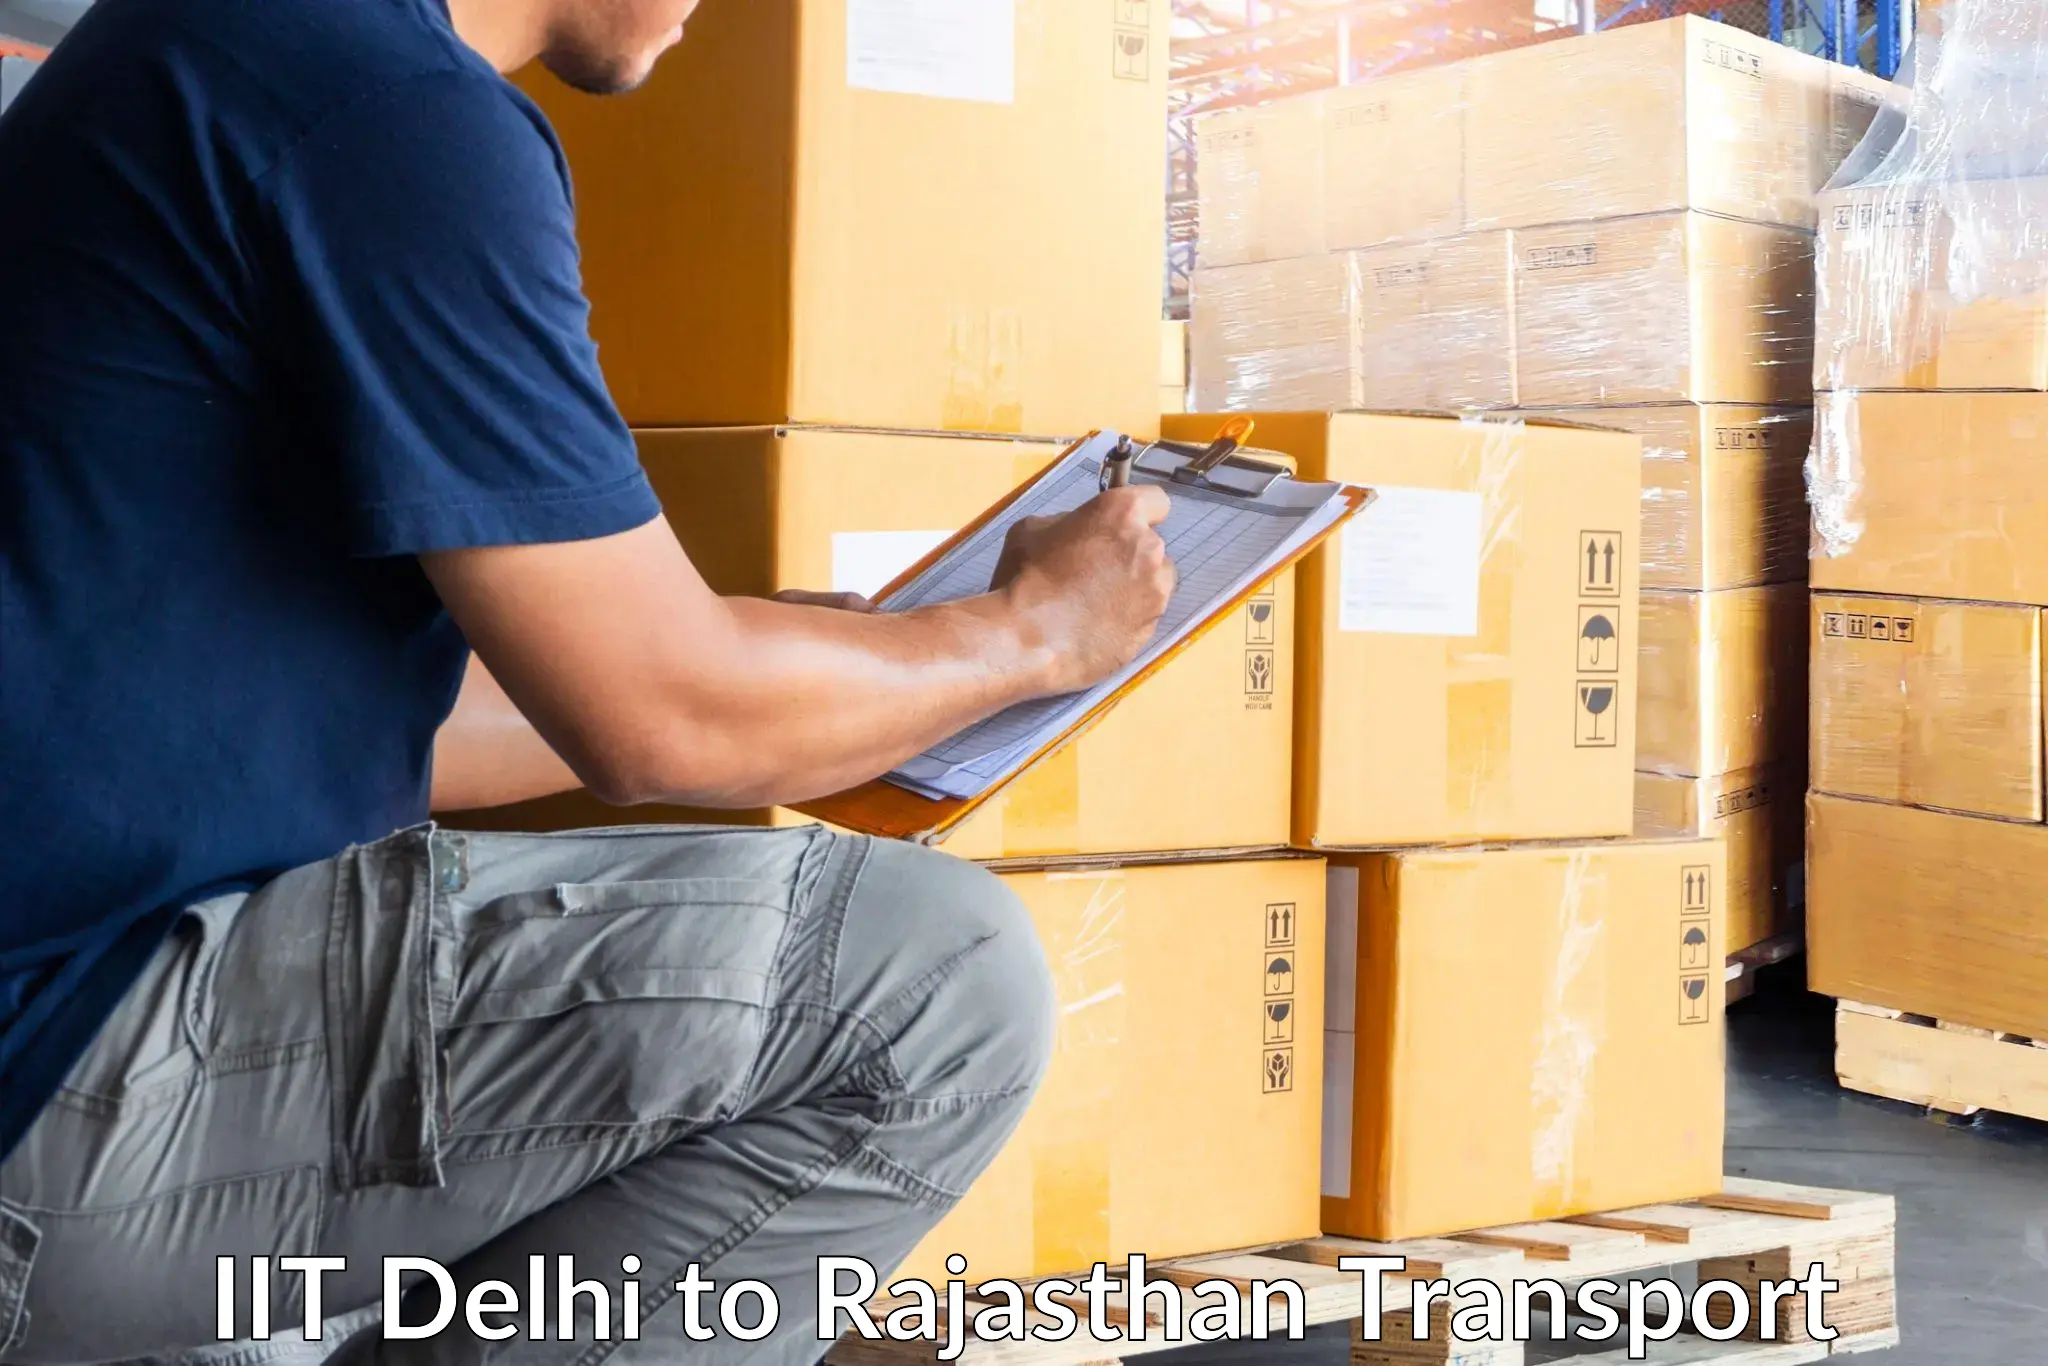 Commercial transport service IIT Delhi to Rajasthan